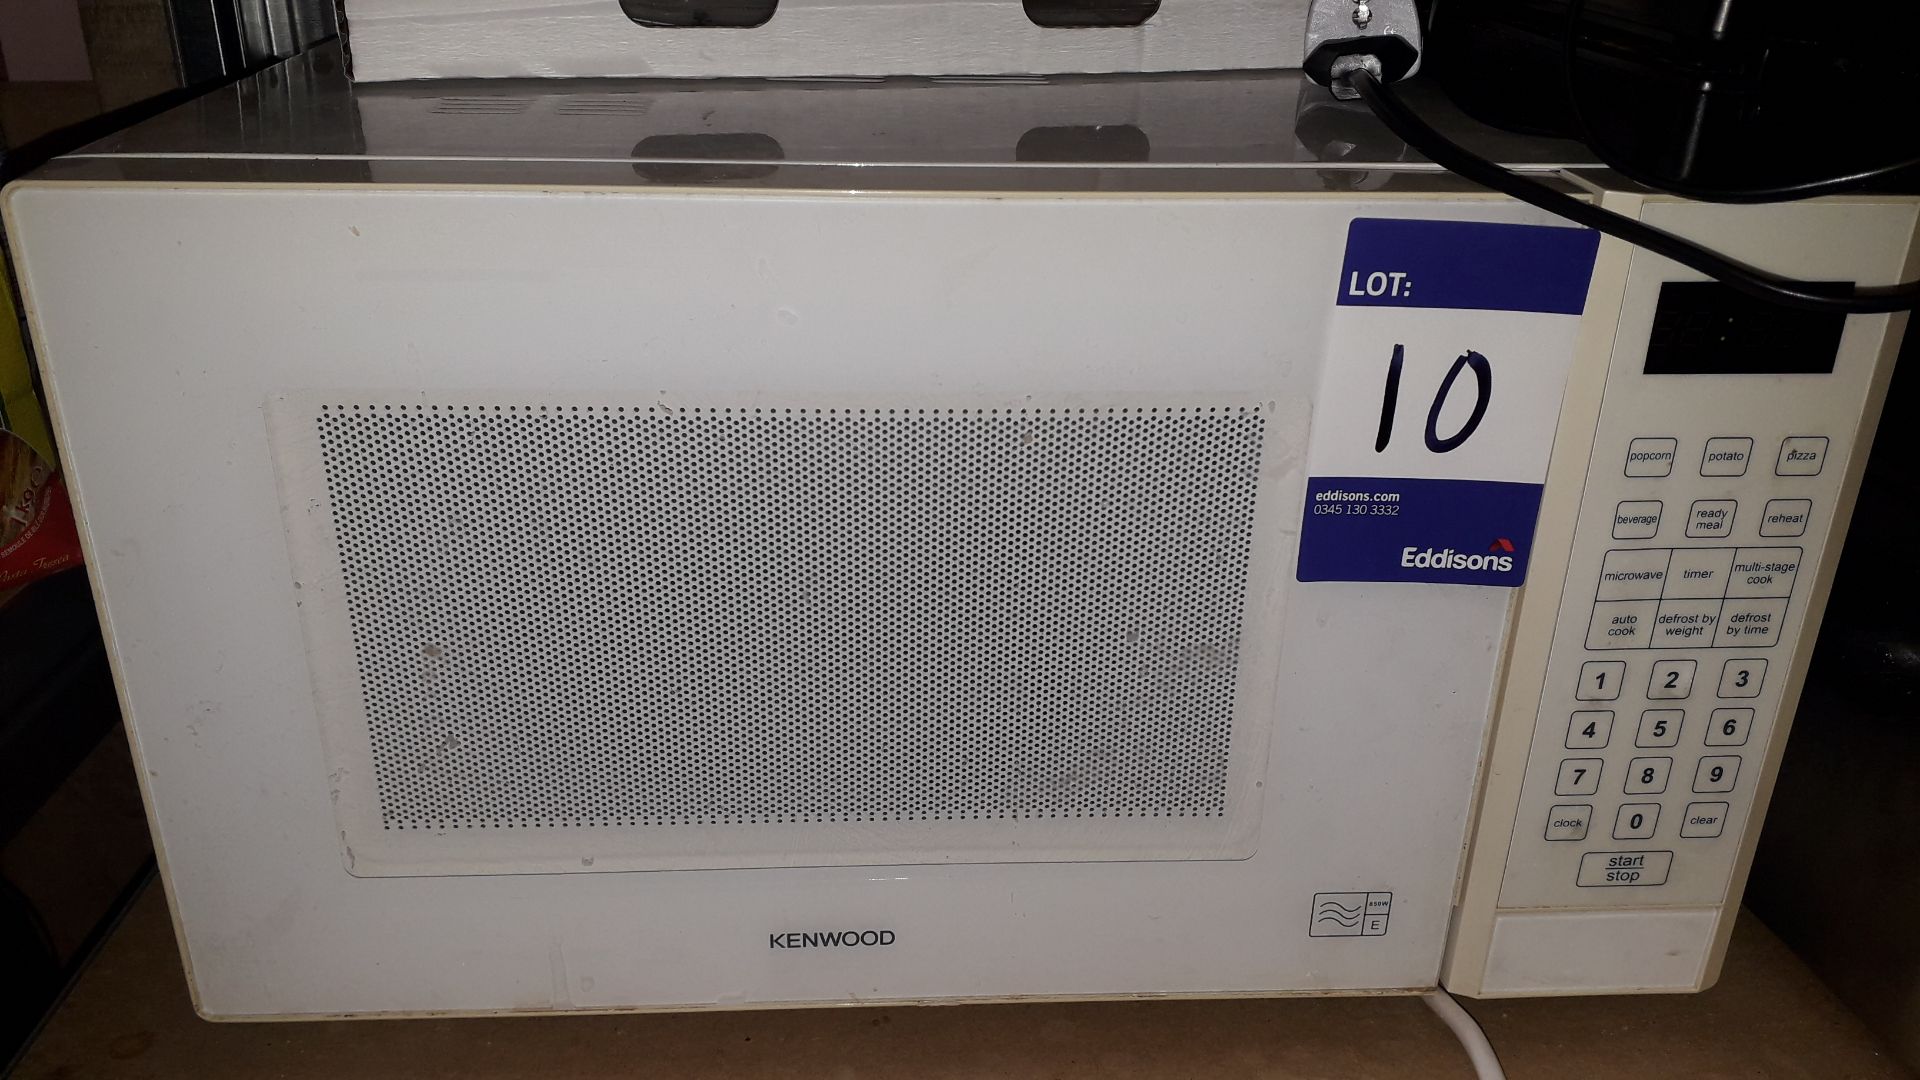 Kenwood K25MW10 900w Microwave, Stainless Steel Co - Image 2 of 6